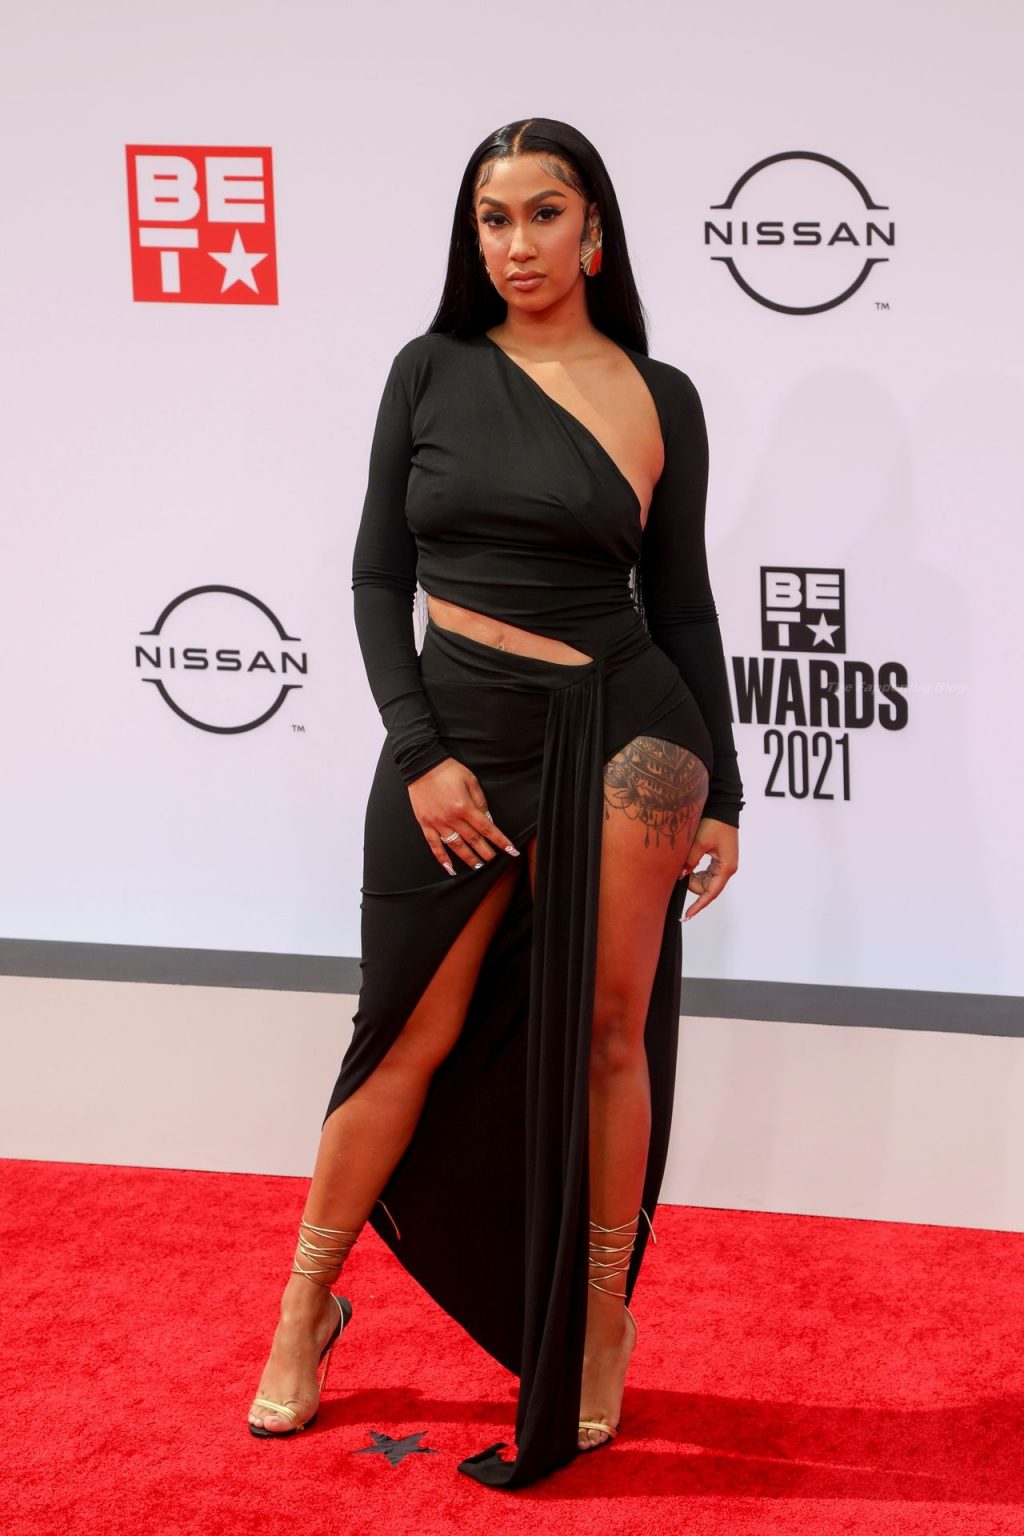 Queen Naija is Seen at The BET Awards 2021 and Megan Thee Stallion’s BET Afterparty (15 Photos)